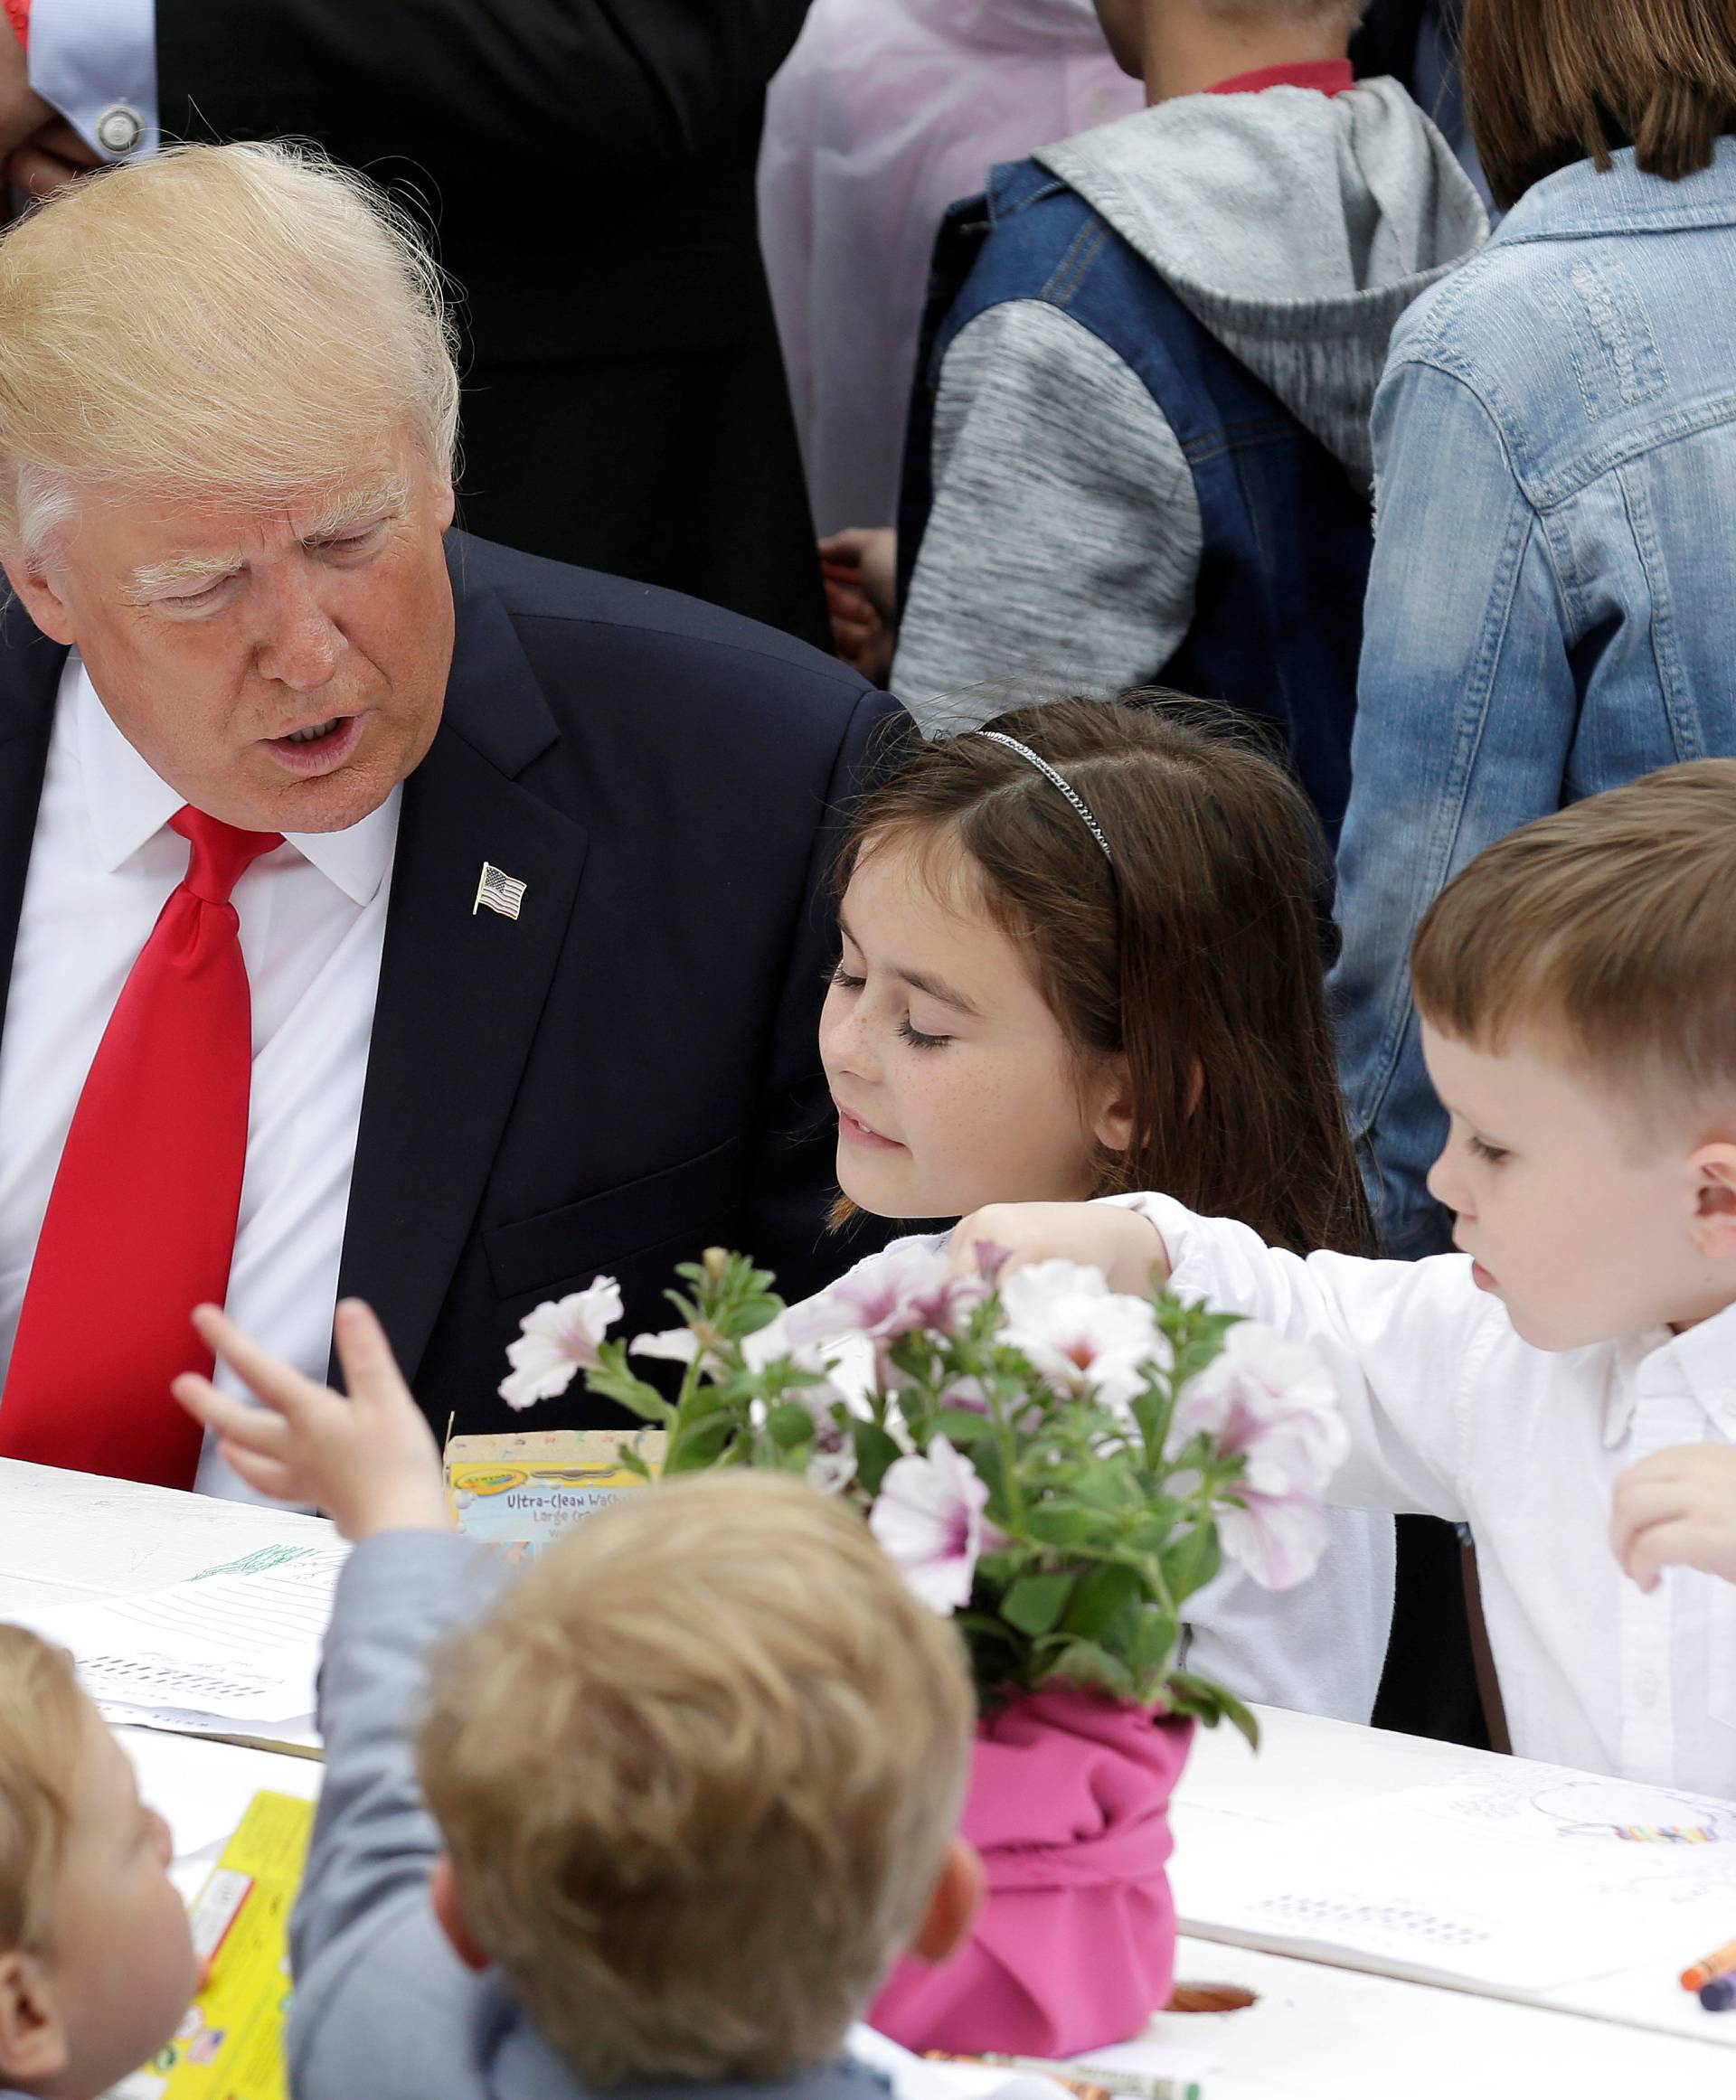 U.S. President Donald Trump speaks with children as they make Easter greeting cards for members of the military at the 139th annual White House Easter Egg Roll on the South Lawn of the White House in Washington